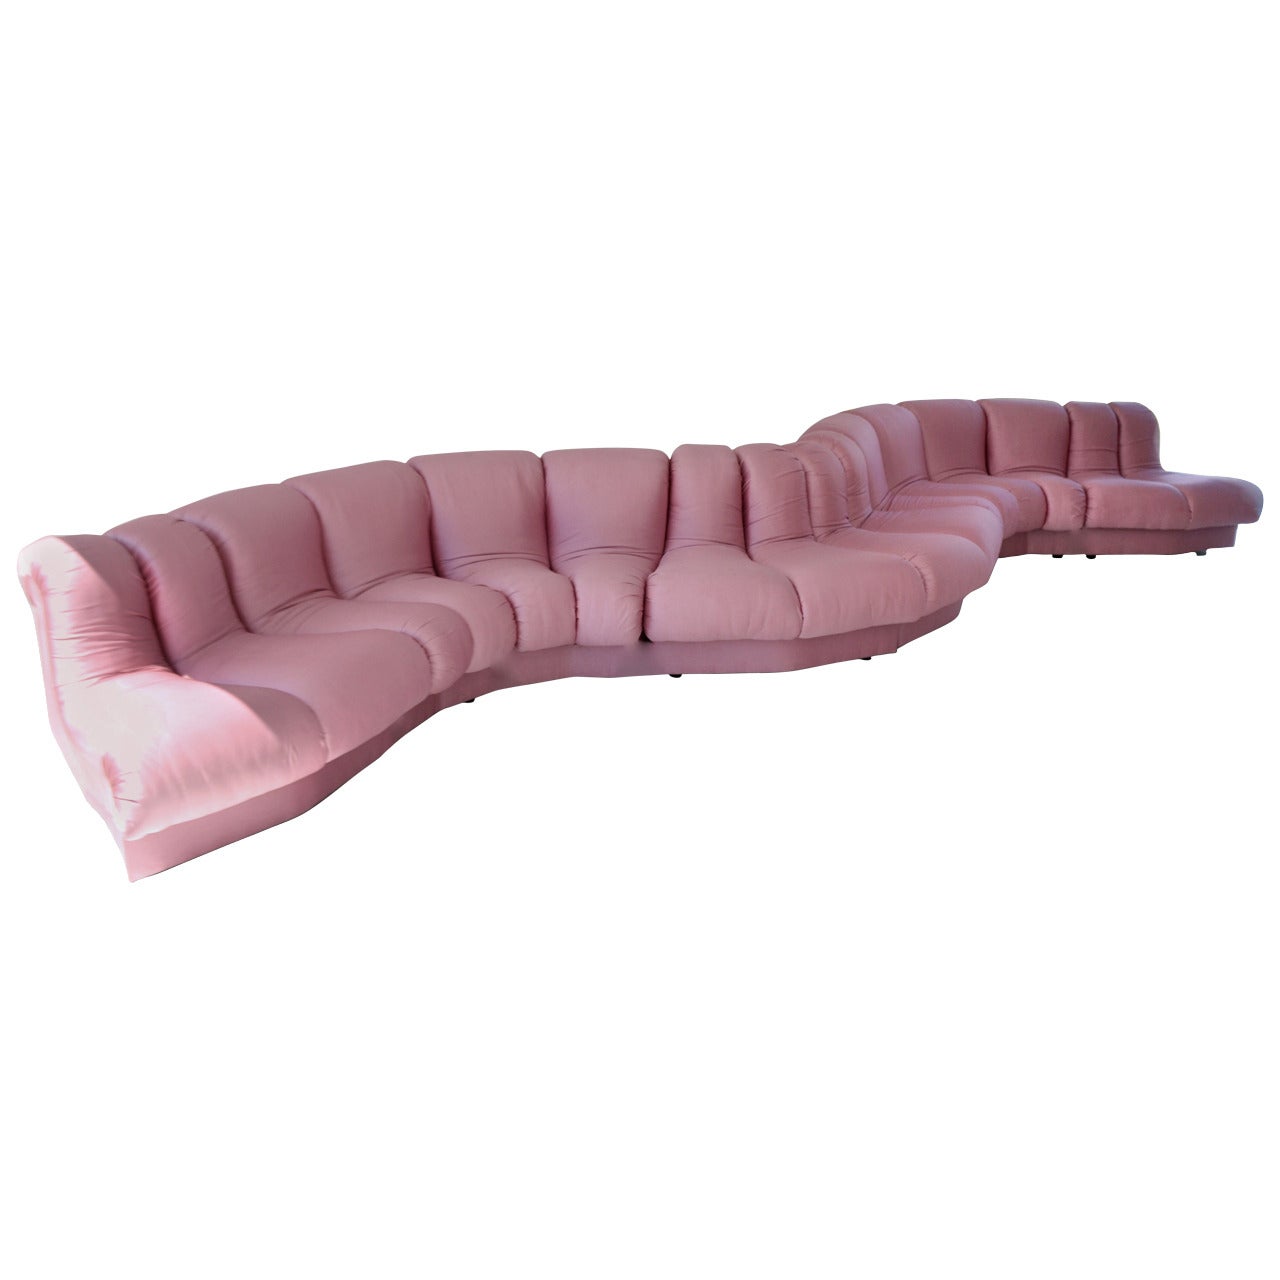 Eight-Piece Serpentine Sectional Sofa For Sale